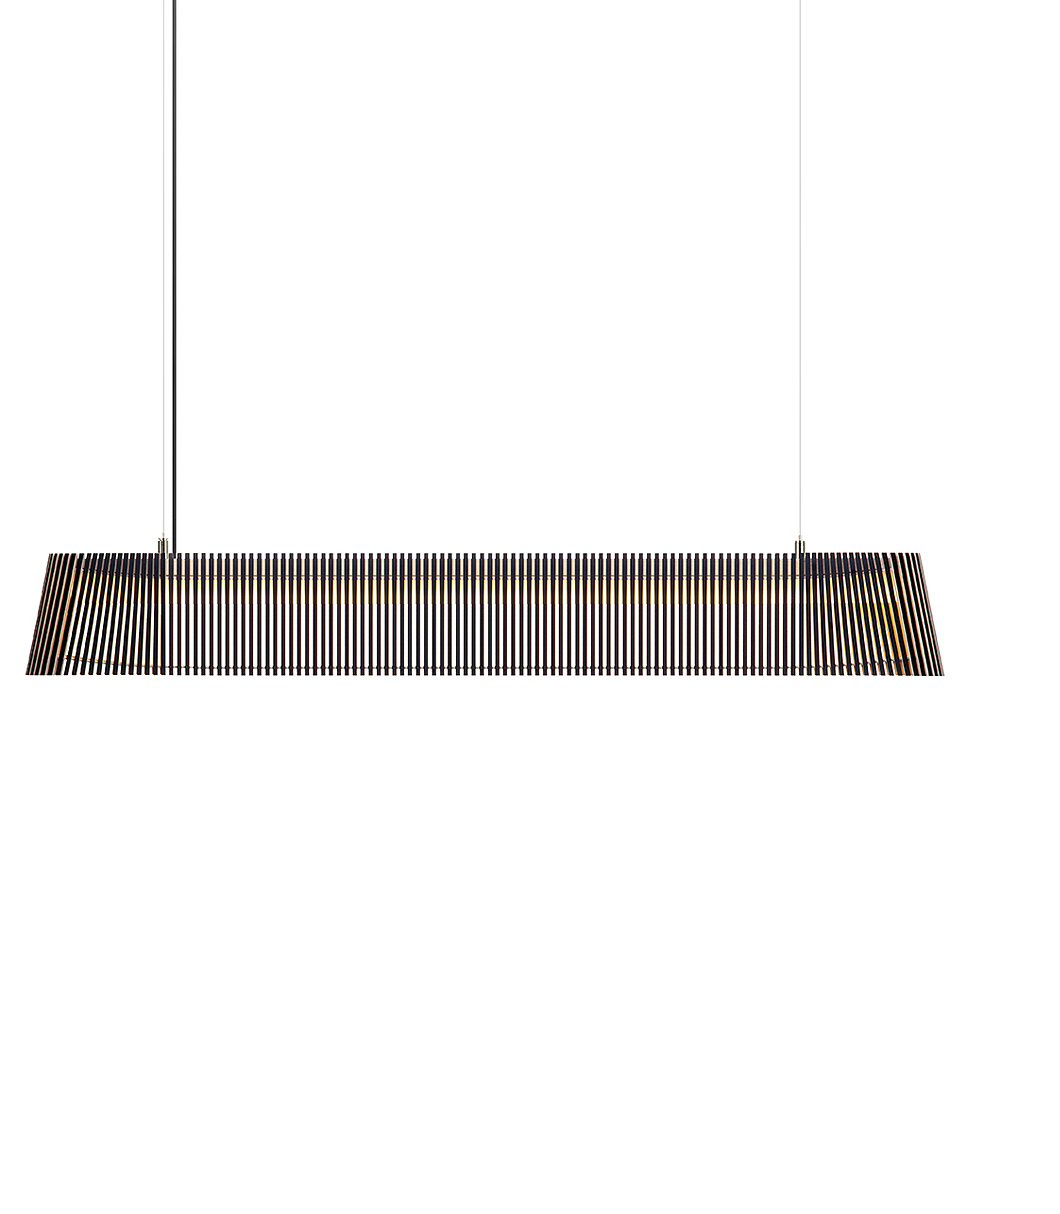 Owalo 7000 pendant lamp is available in black laminated